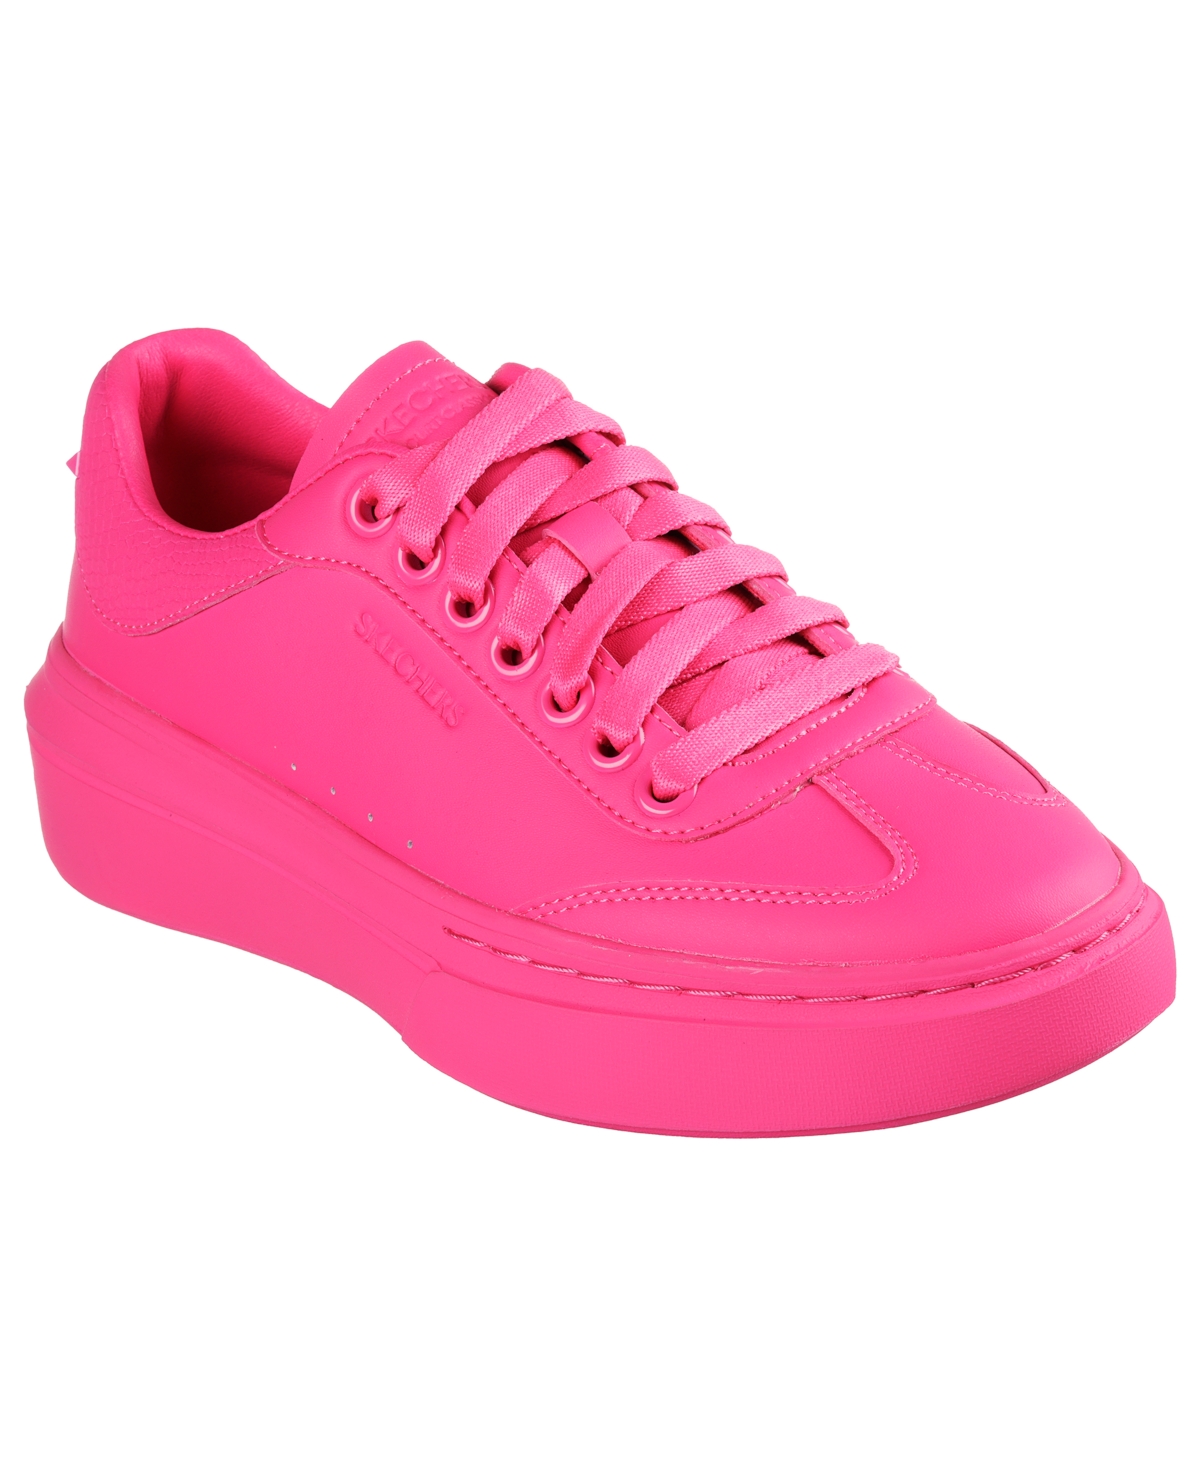 Women's Cordova Classic - All Bright Casual Sneakers from Finish Line - Lime